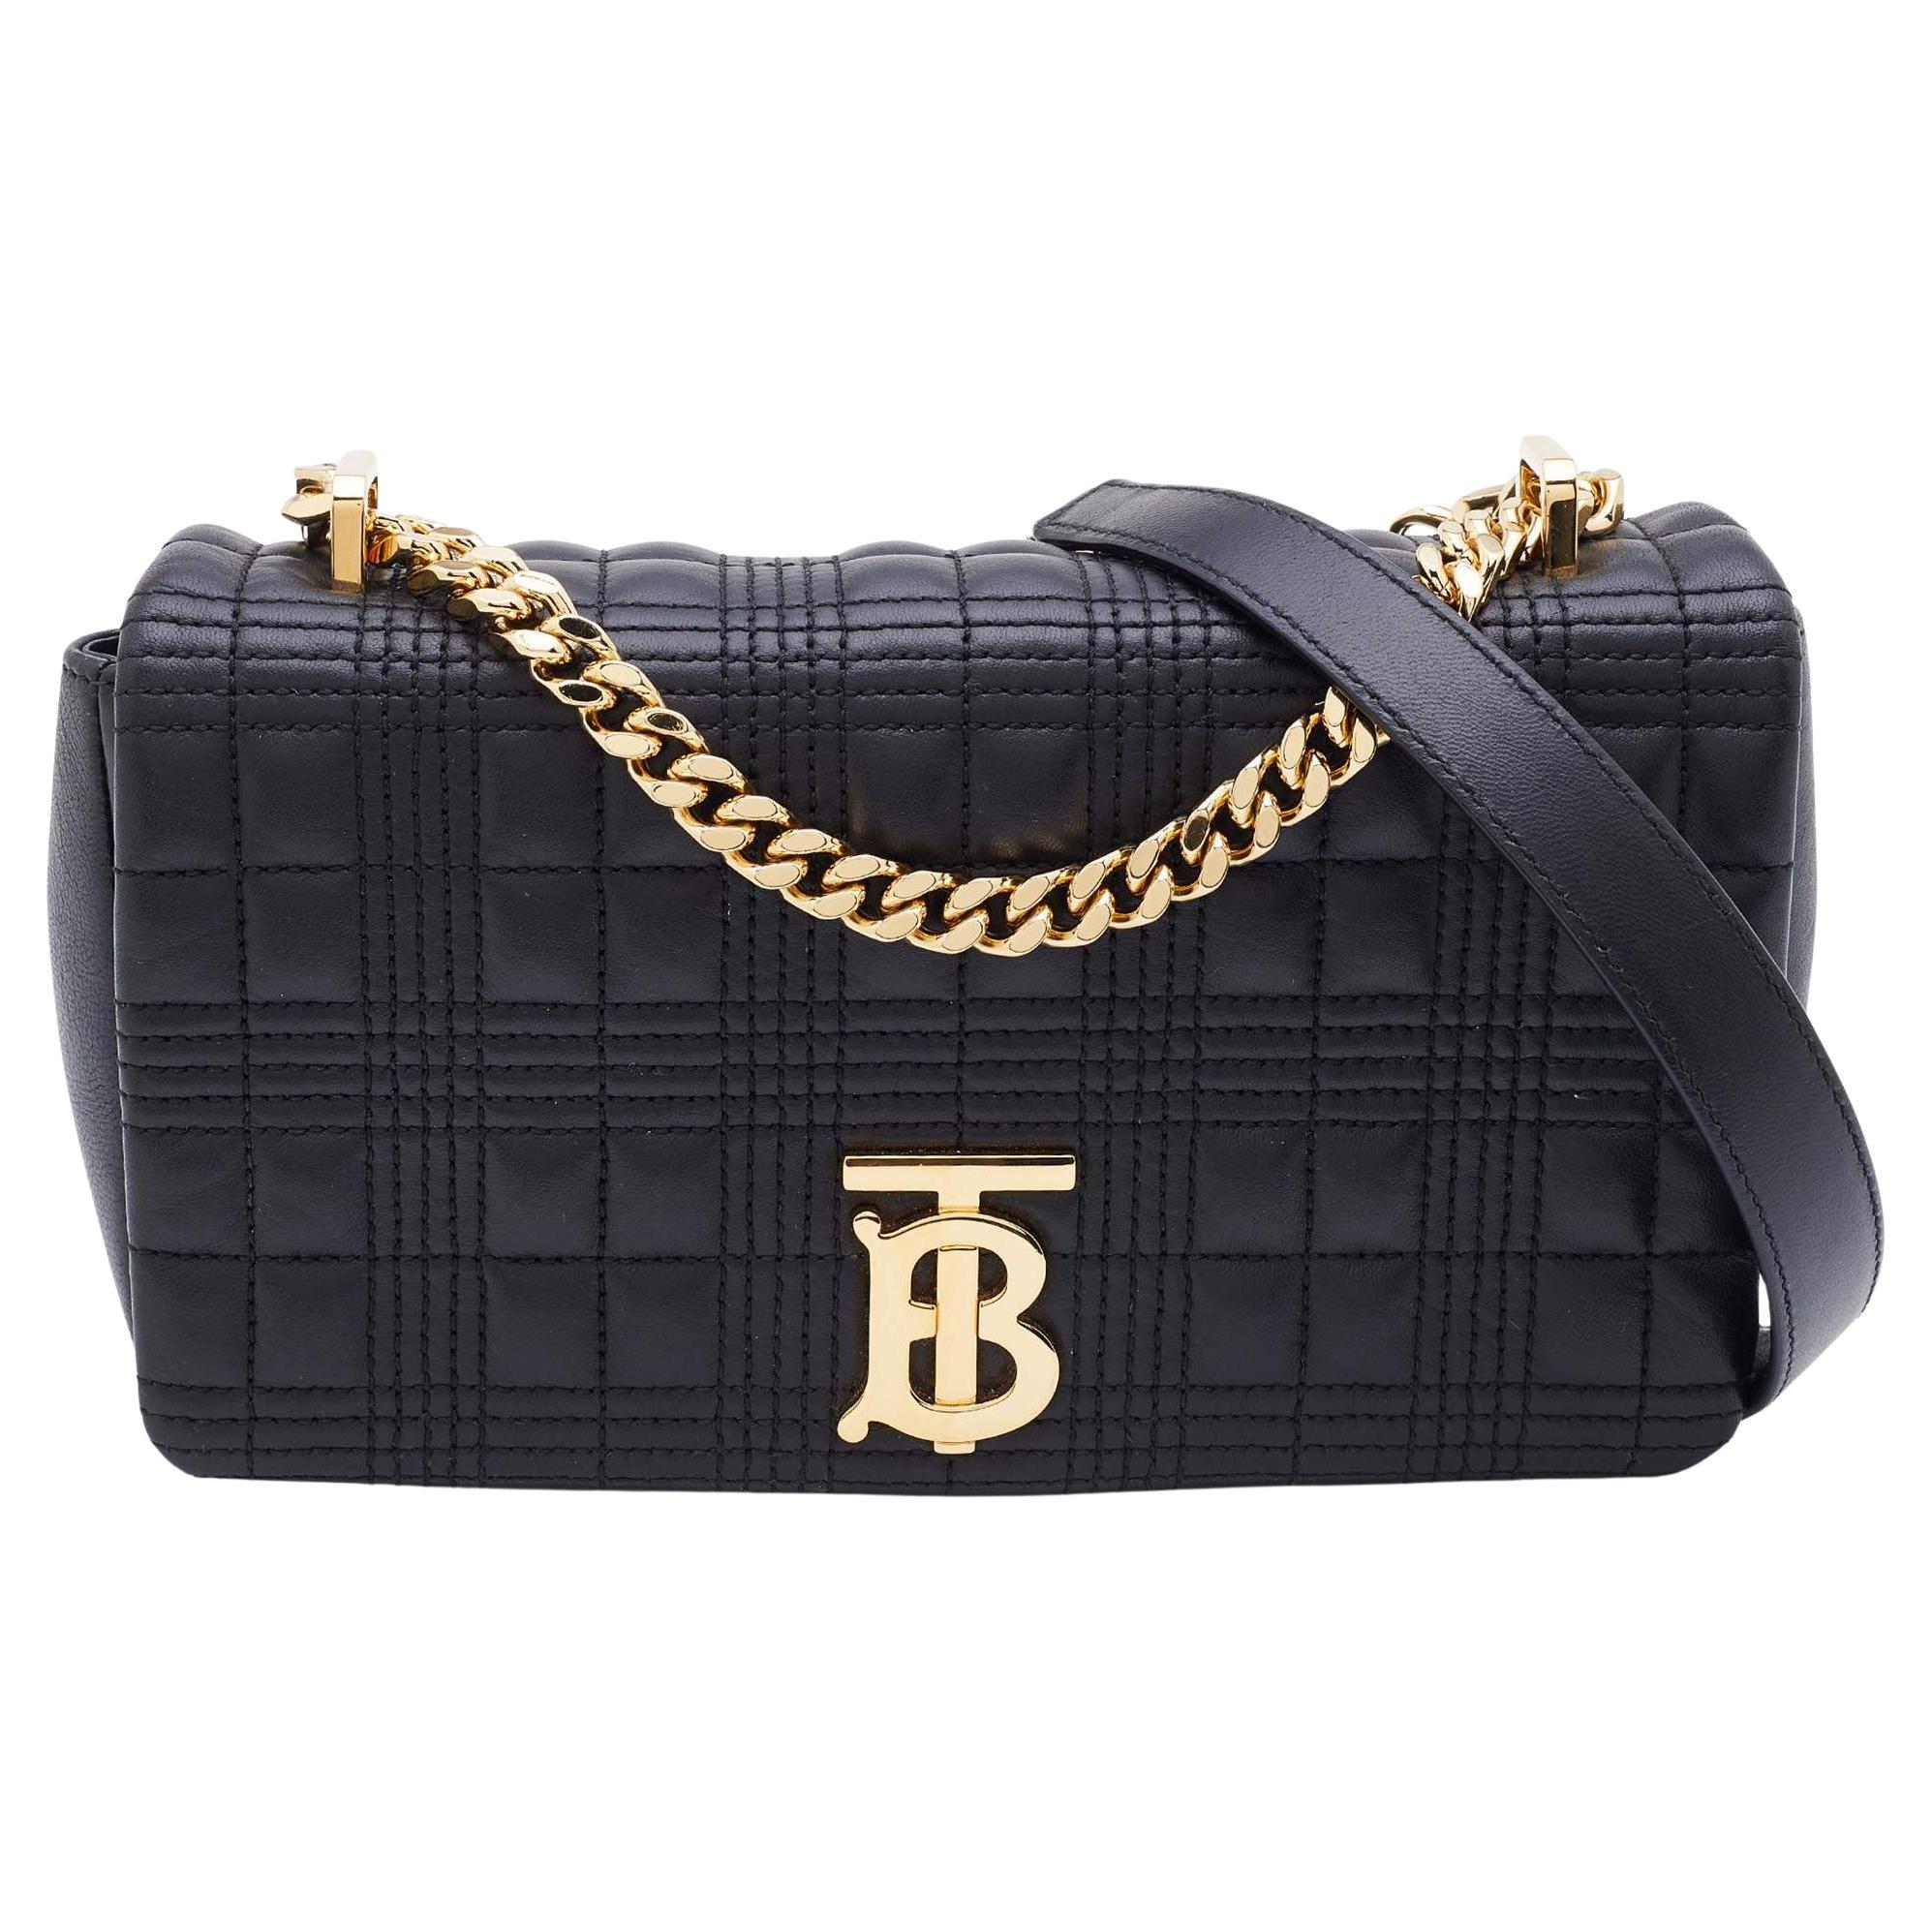 Burberry Black Quilted Leather Small Lola Shoulder Bag